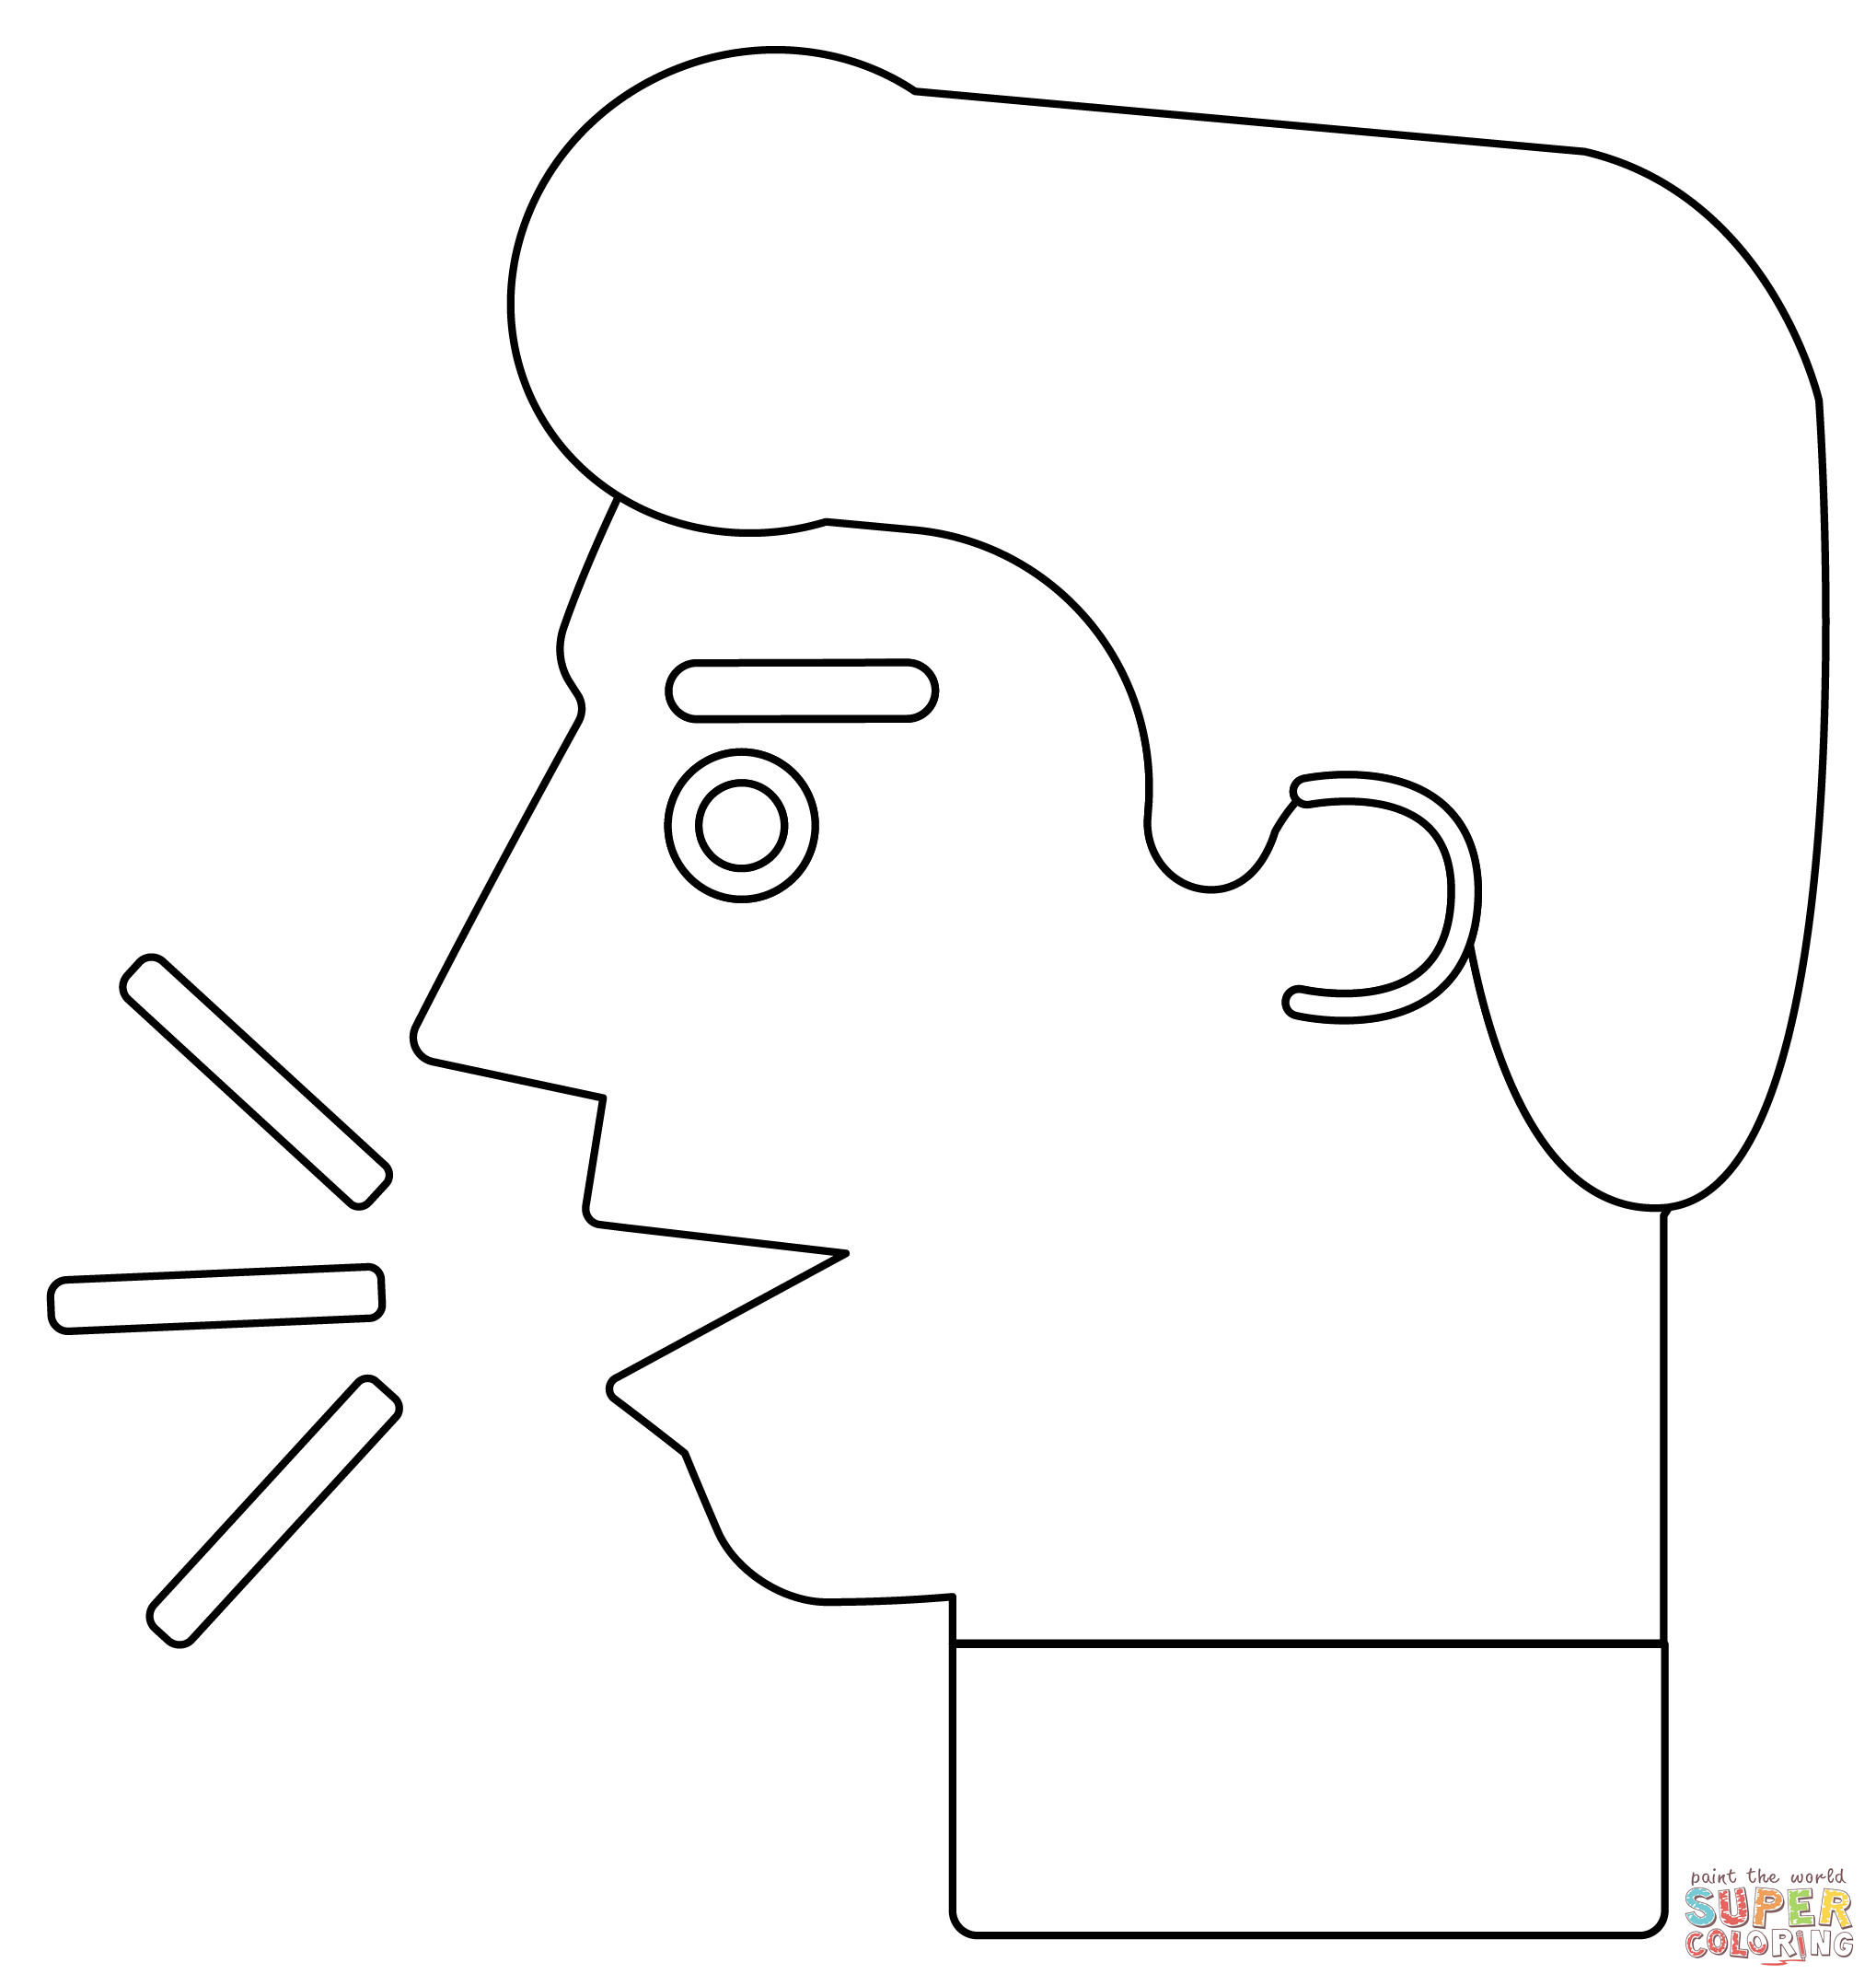 Person Speaking coloring page | Free Printable Coloring Pages